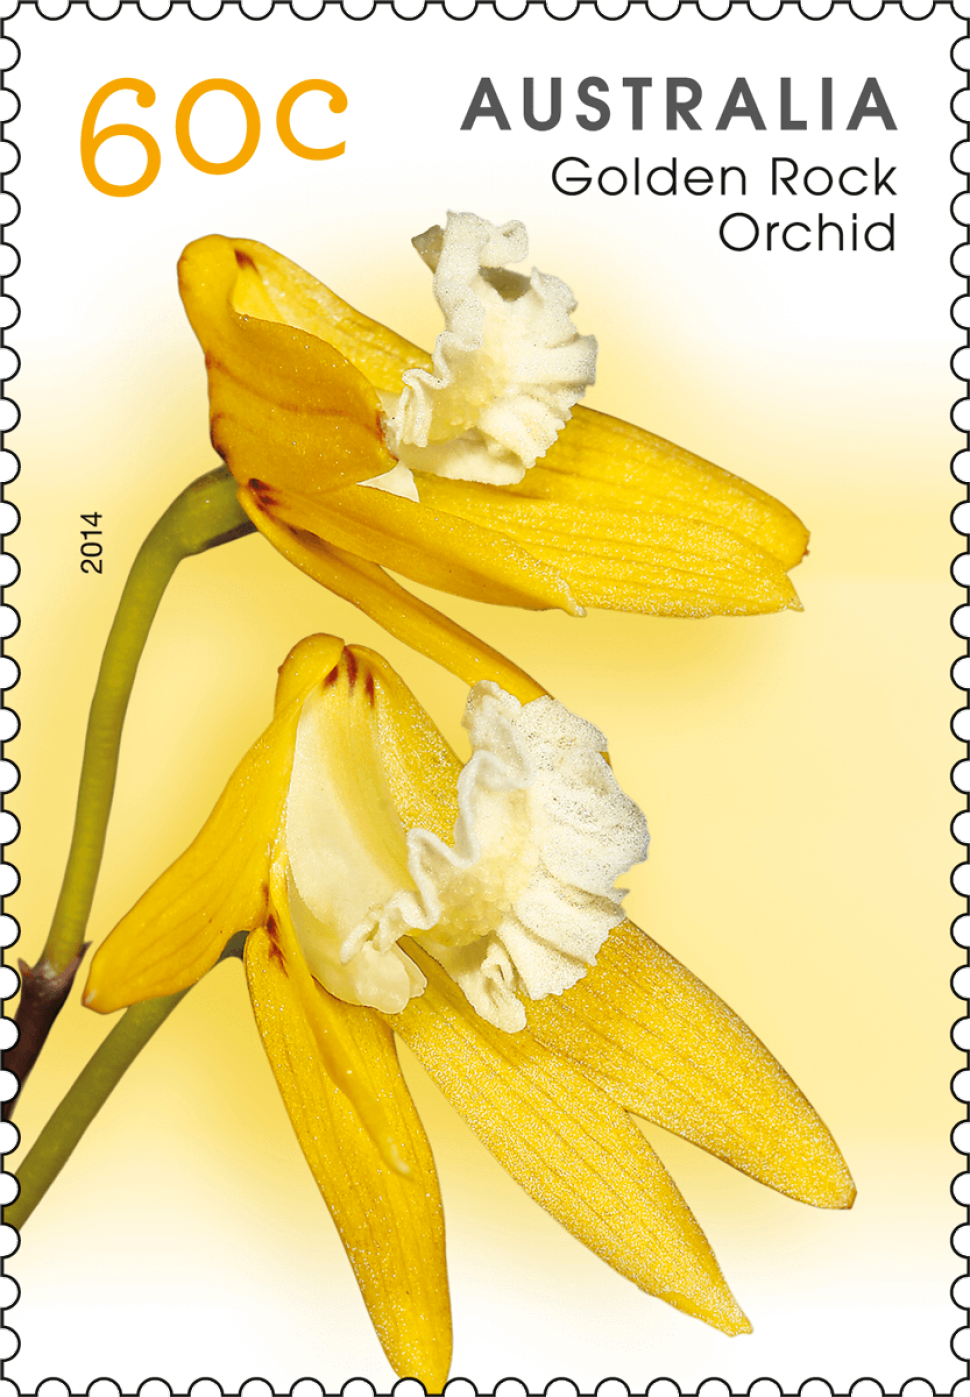 60 cent Golden Rock Orchid stamp